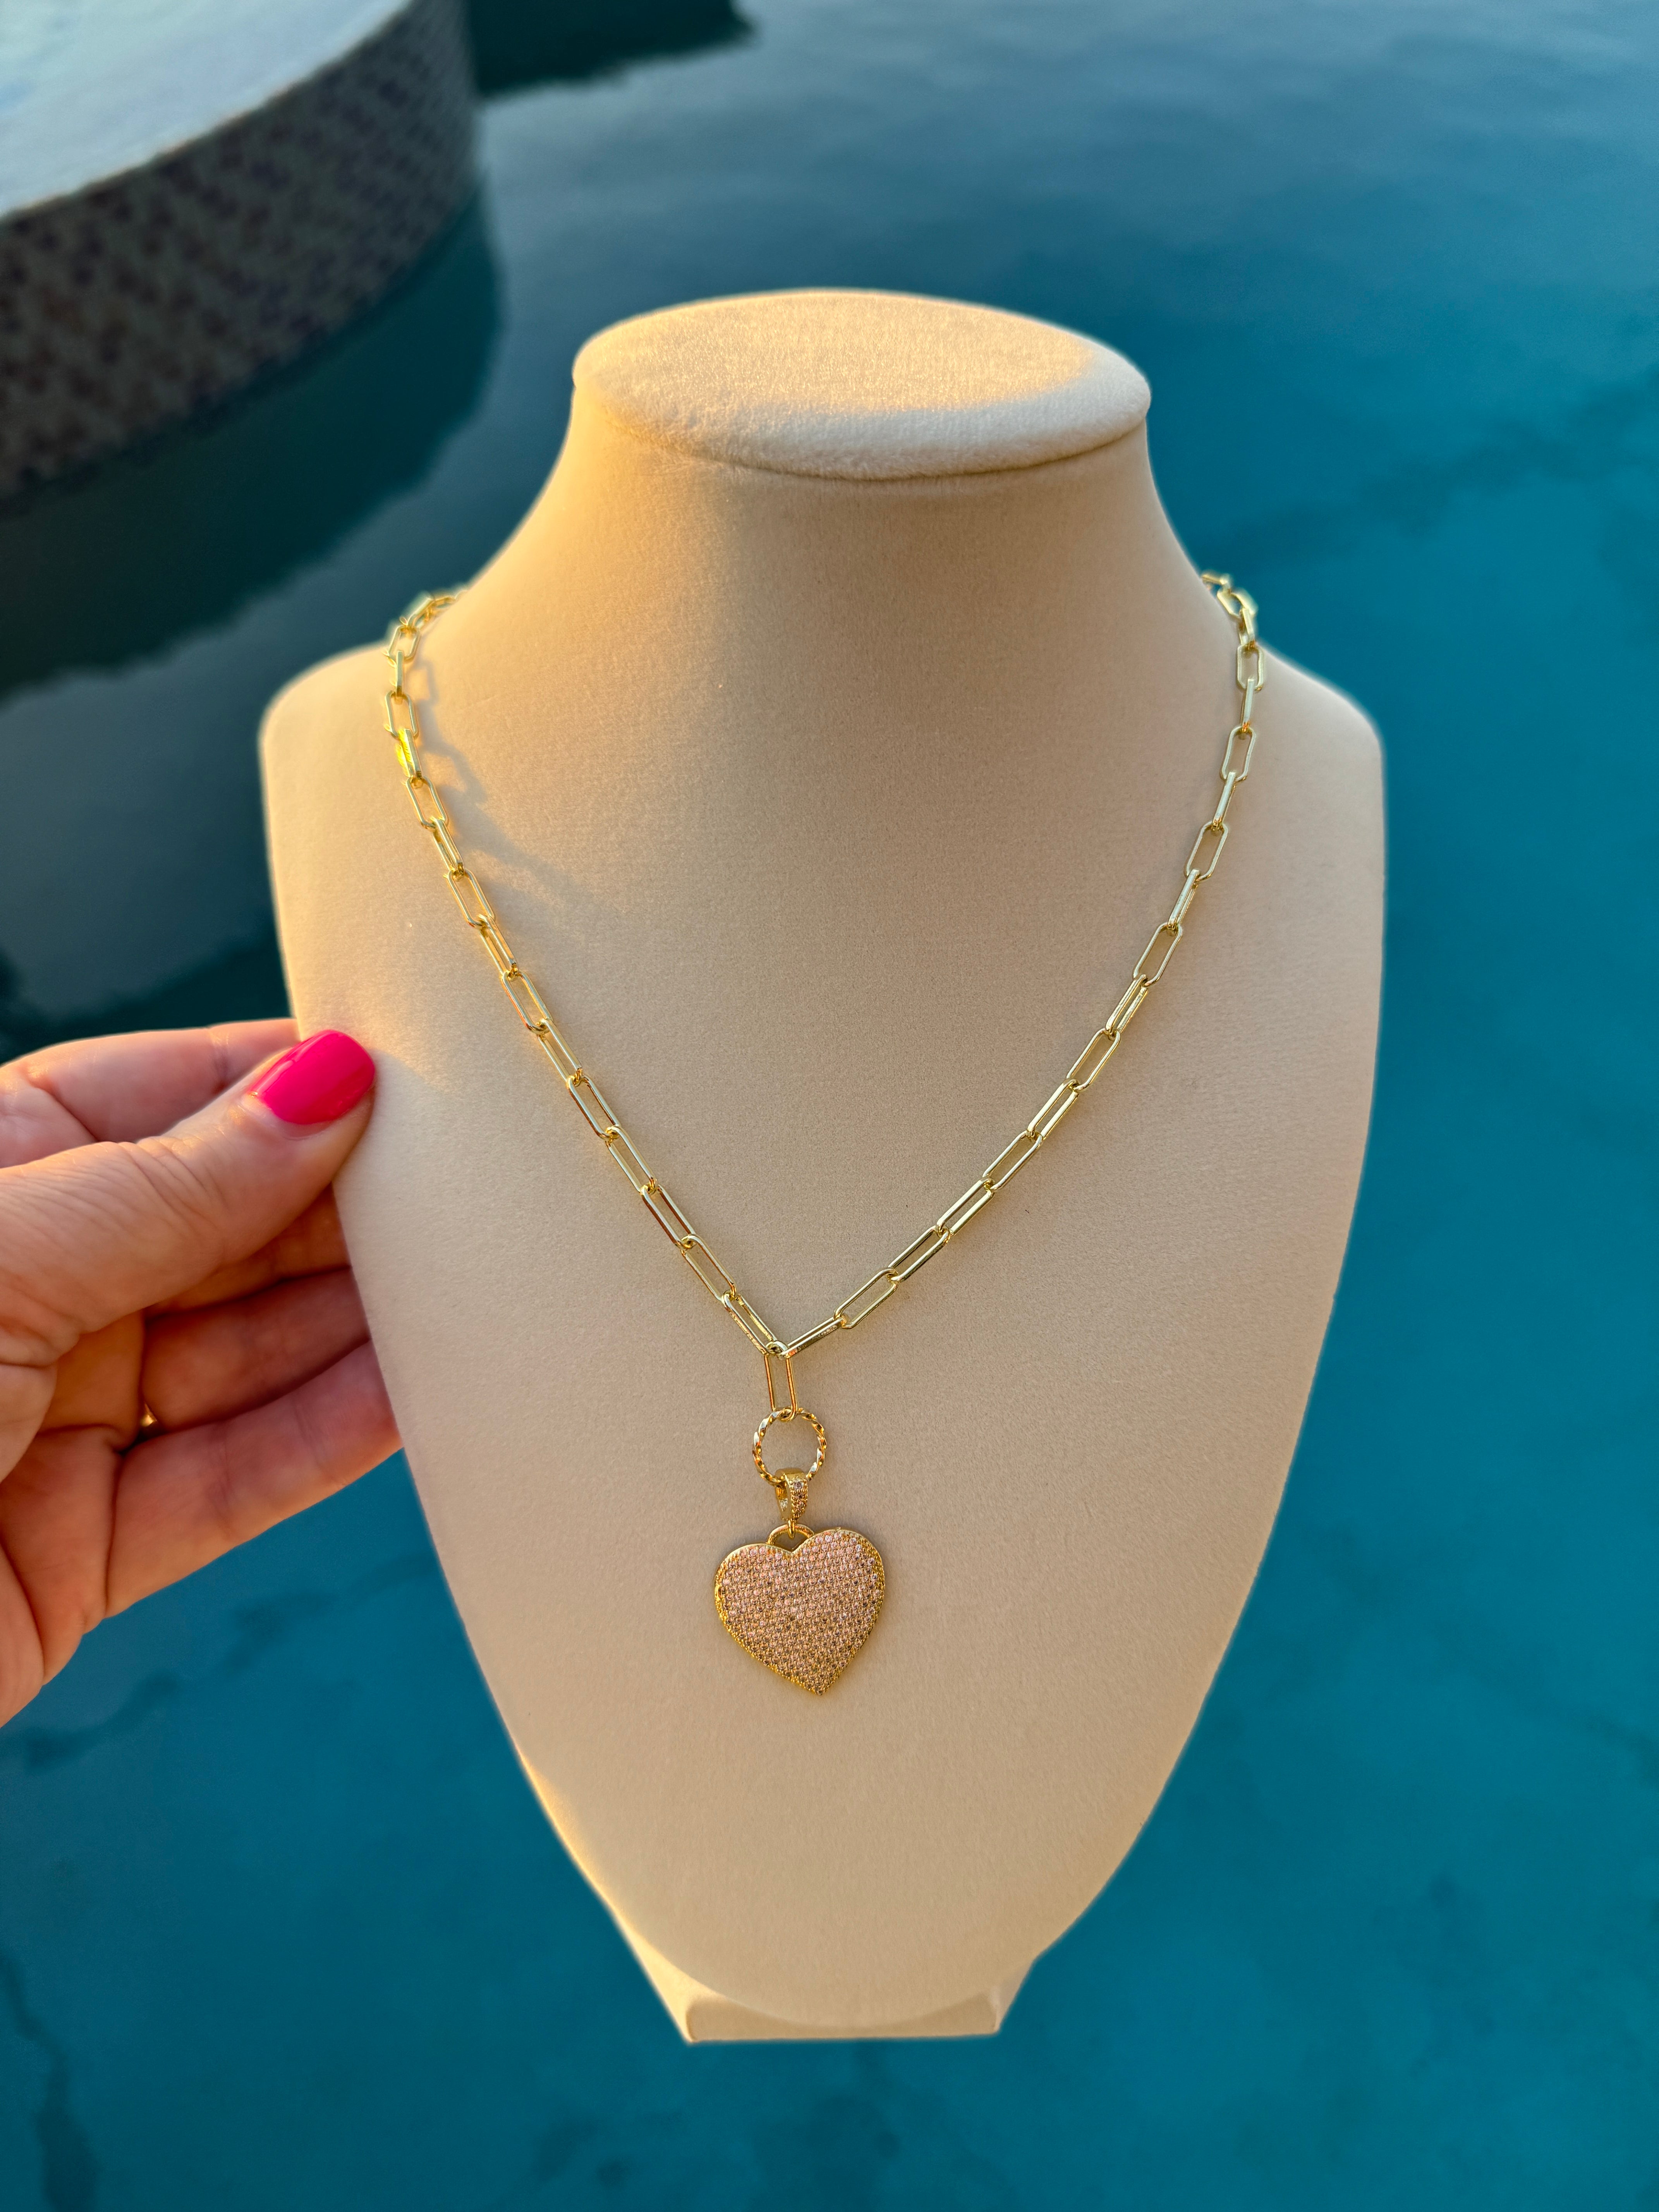 The Paperclip Heart Necklace